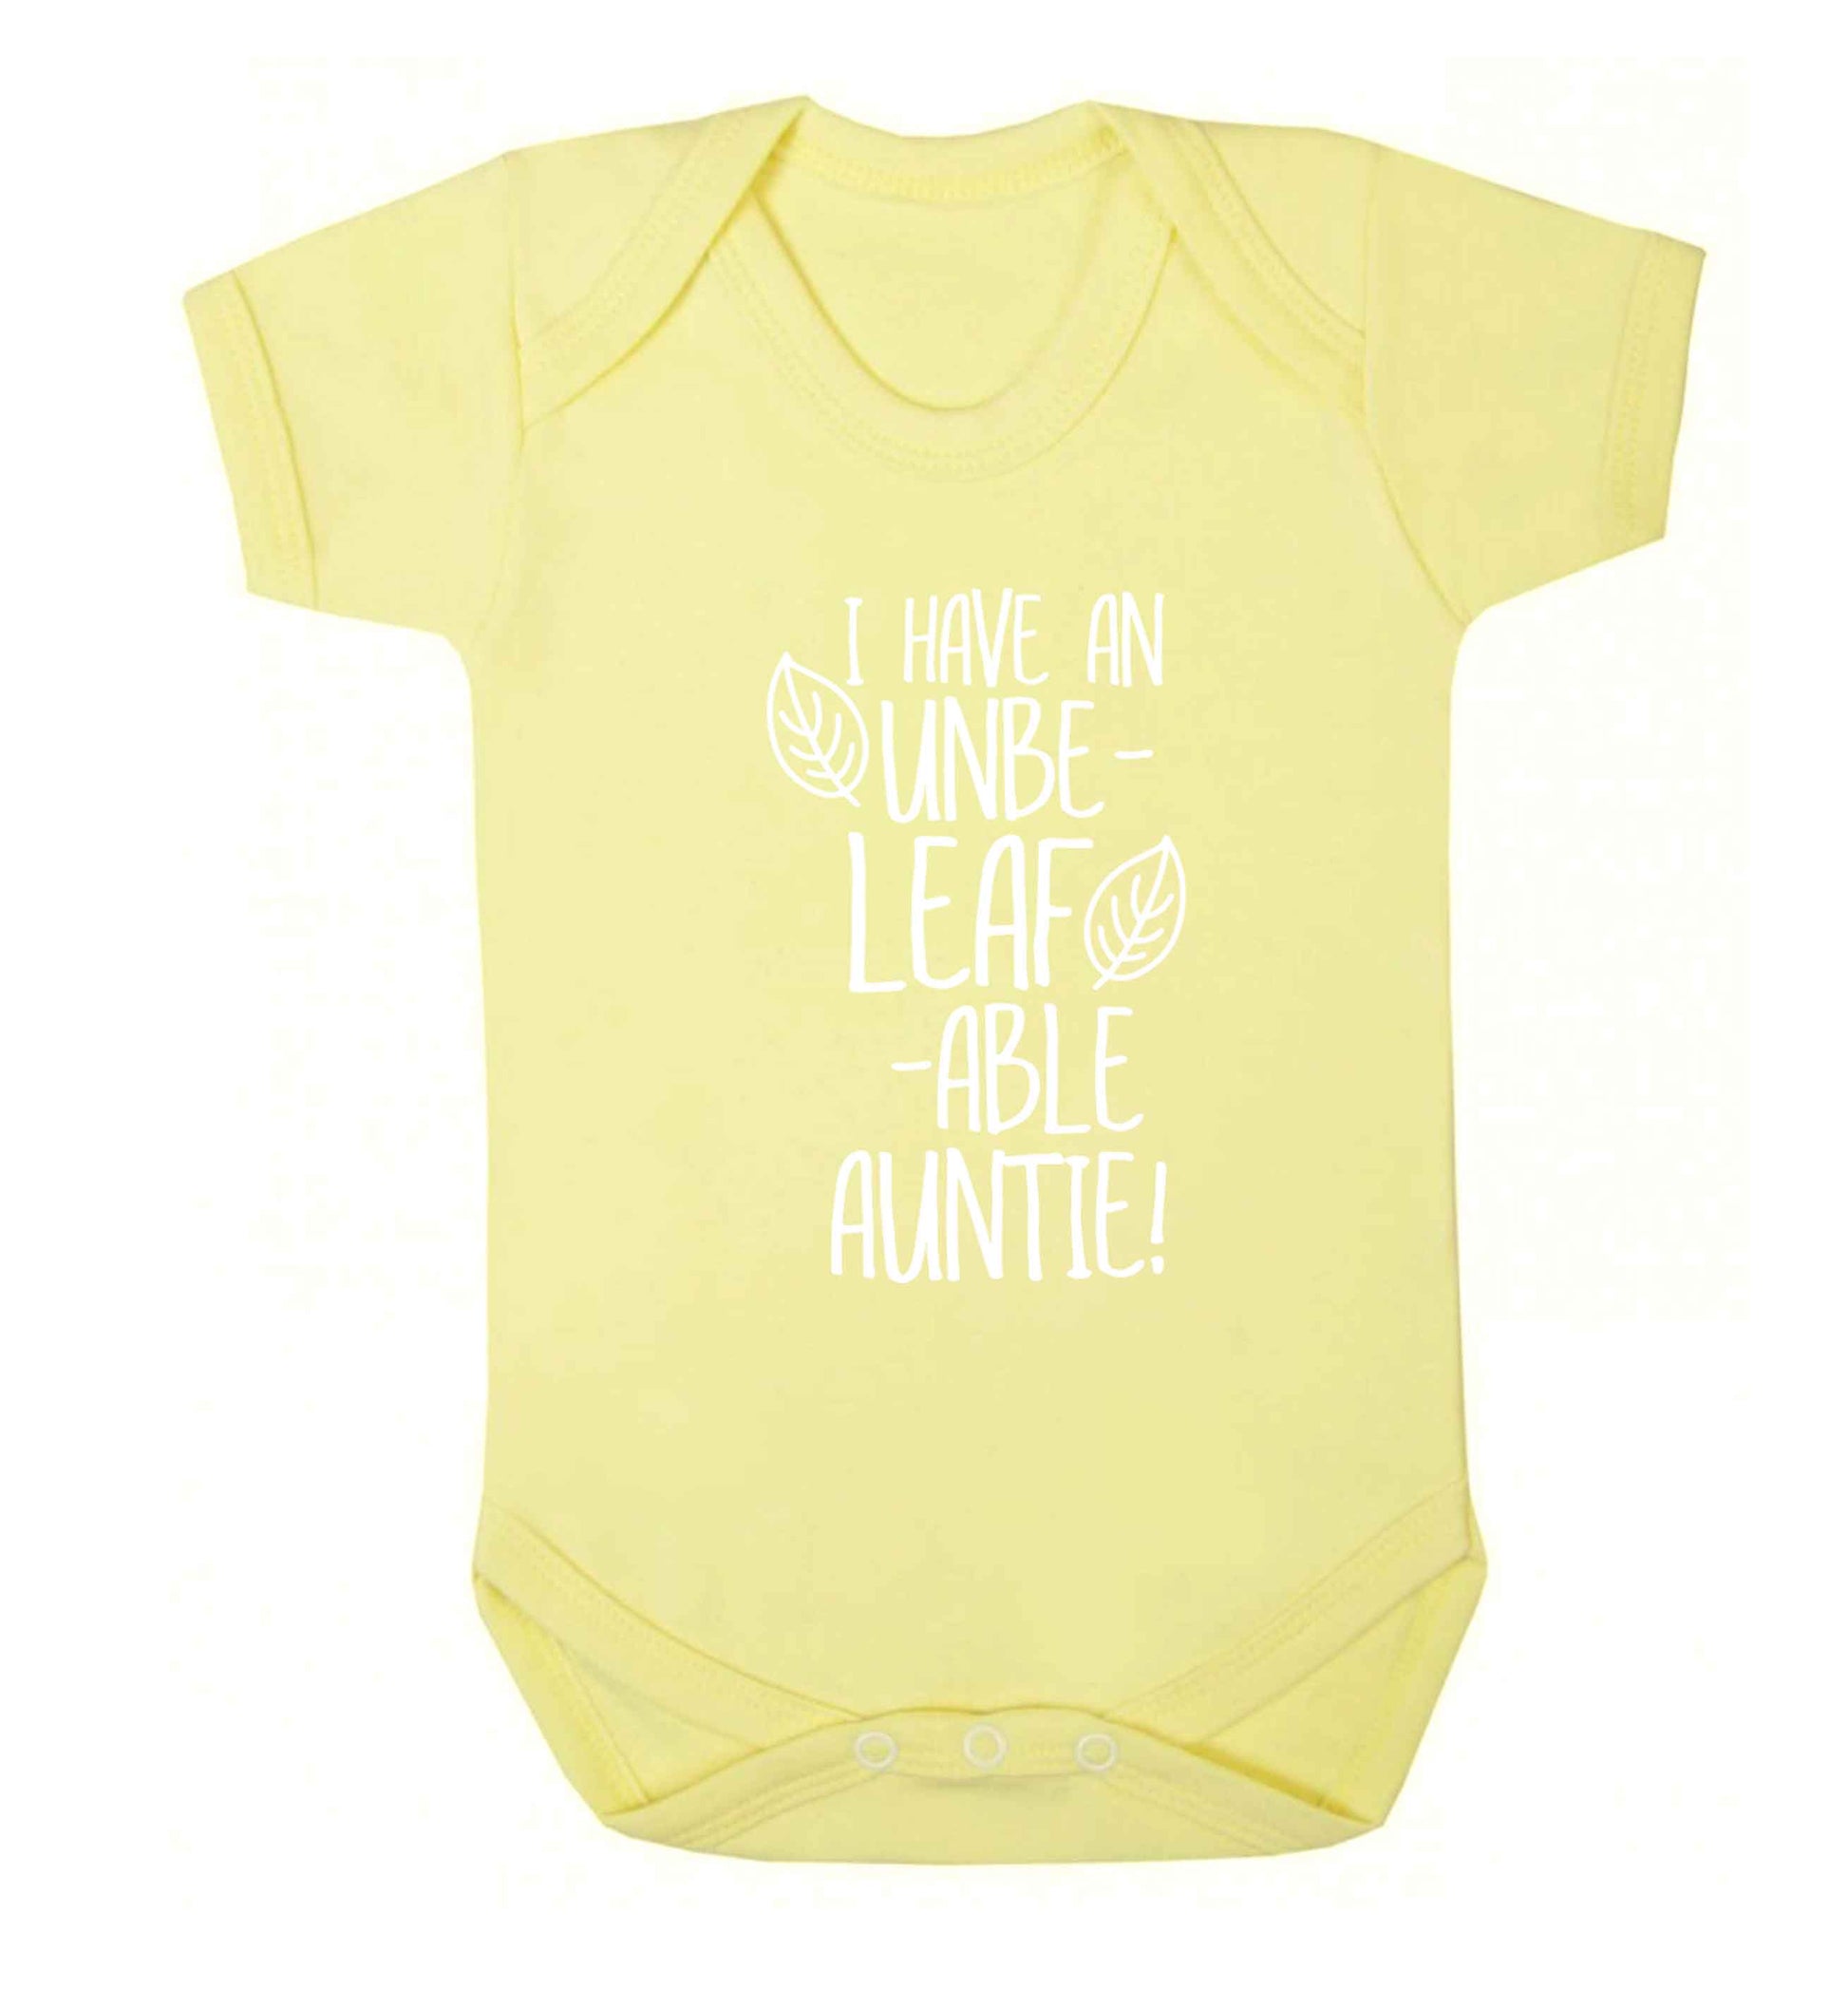 I have an unbe-leaf-able auntie Baby Vest pale yellow 18-24 months